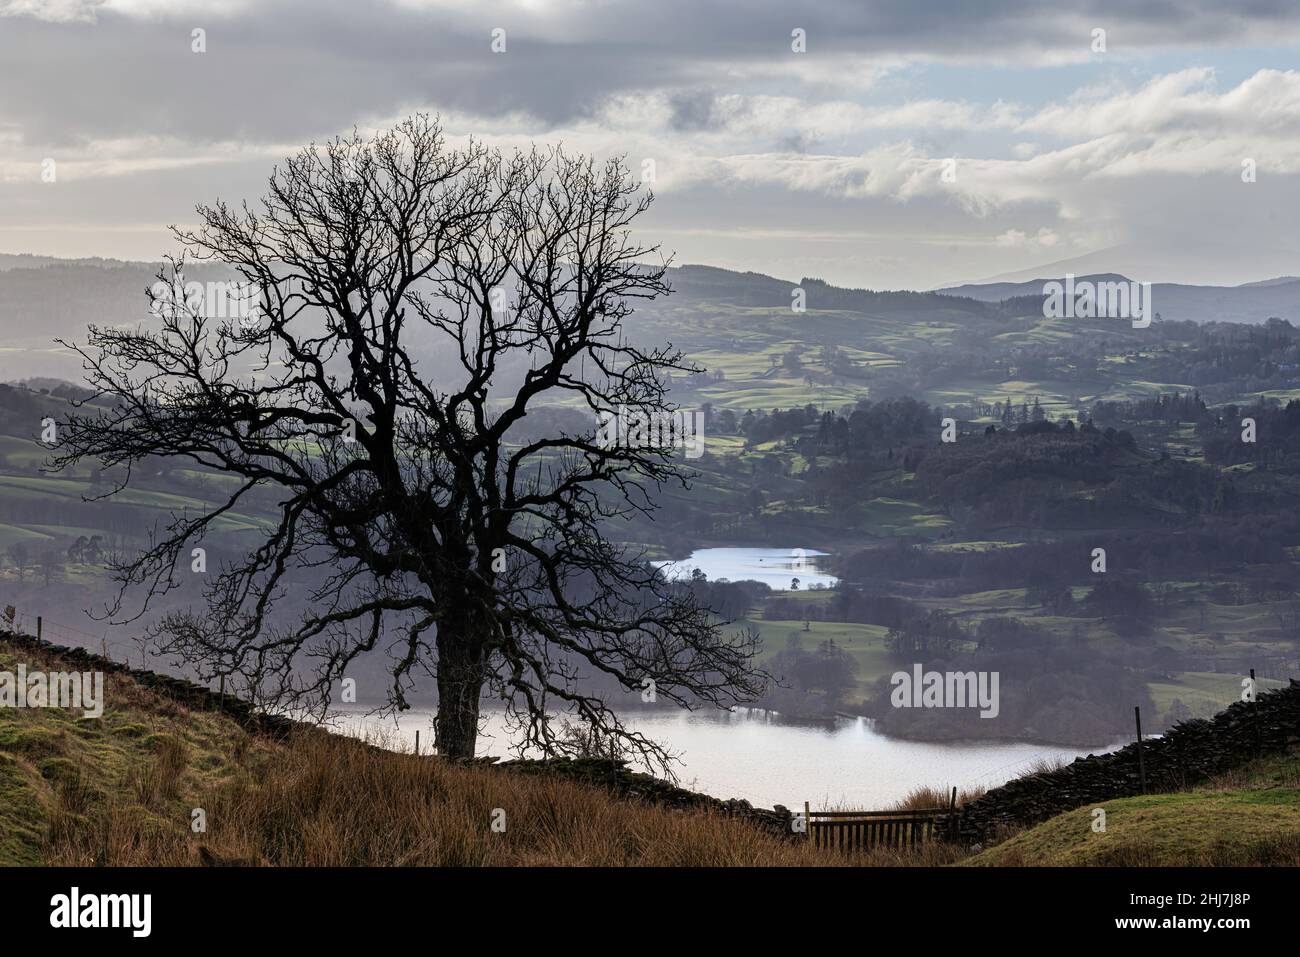 View from Wansfell over northern Windermere and Blelham tarn with a single tree in the foreground Stock Photo